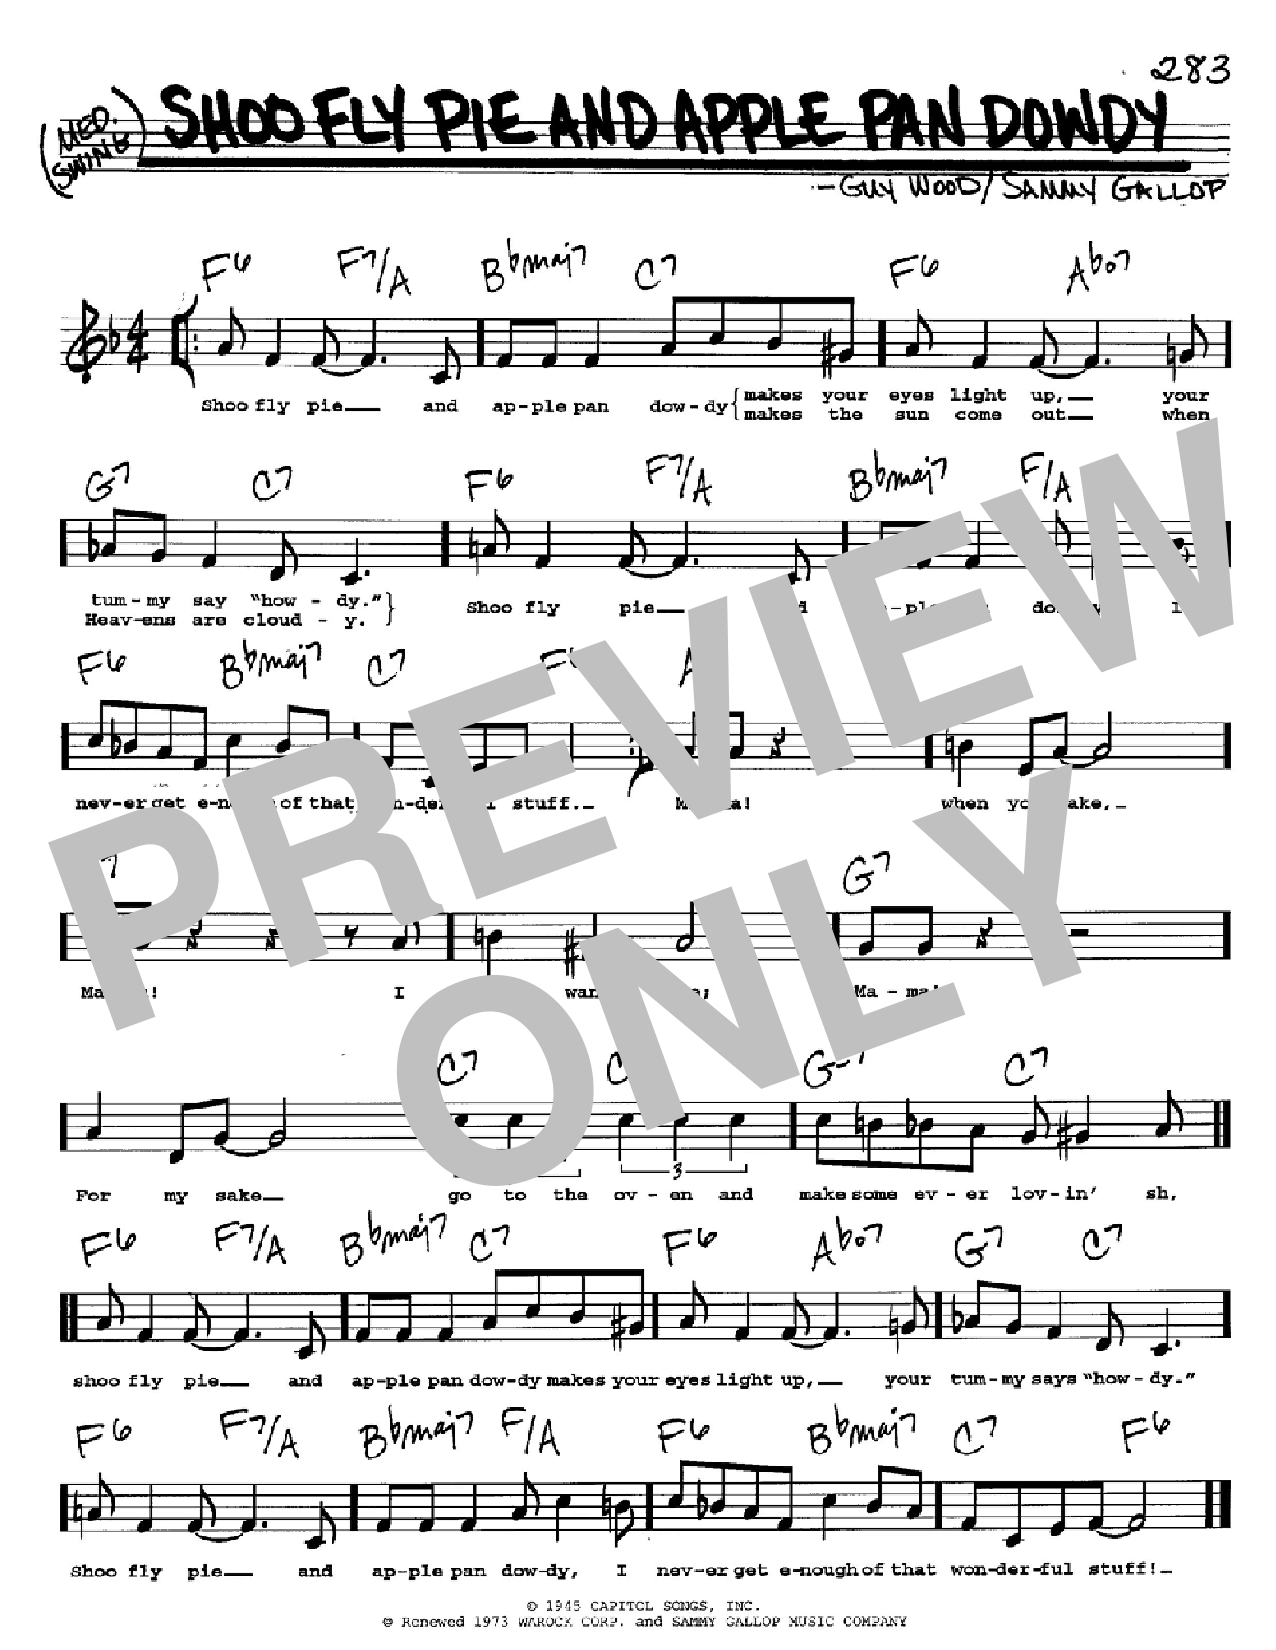 Download Sammy Gallop Shoo Fly Pie And Apple Pan Dowdy Sheet Music